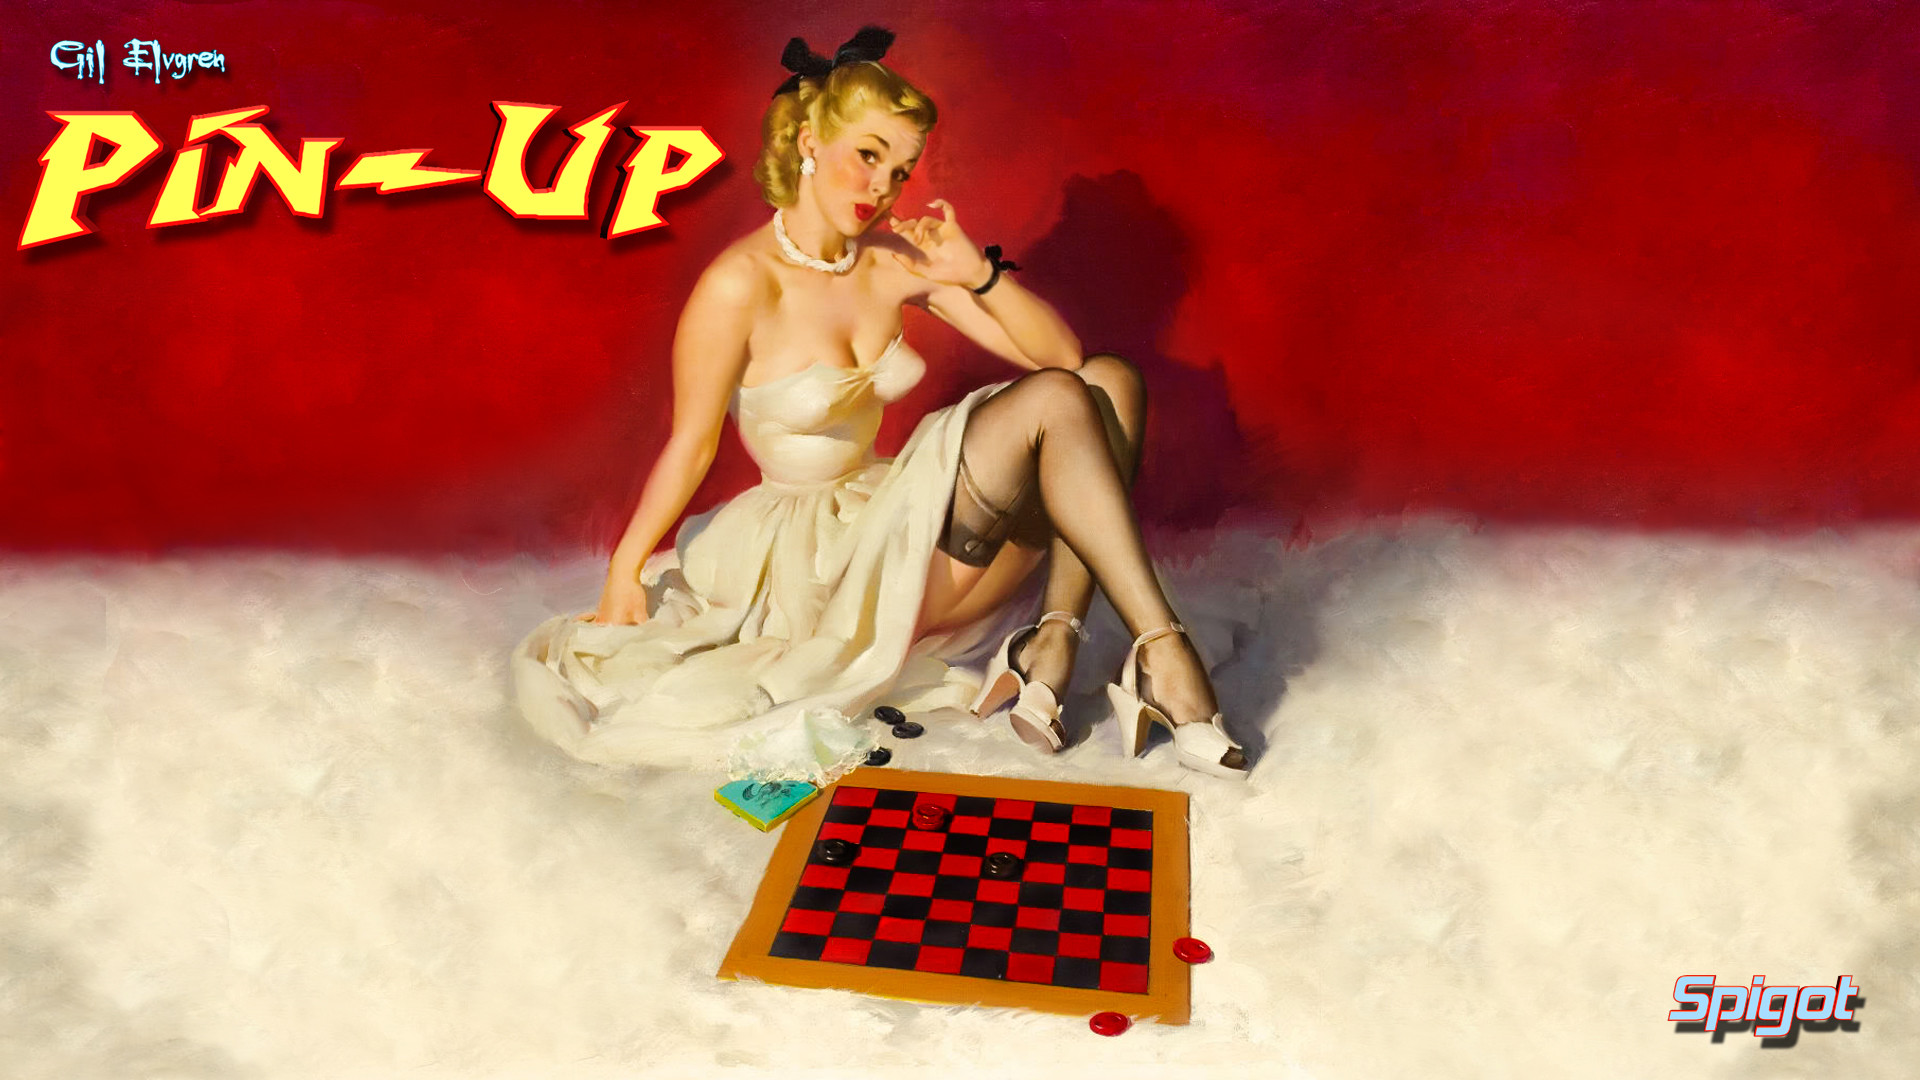 1920x1080 ... pin up background  wallpaper - photo #8 ...